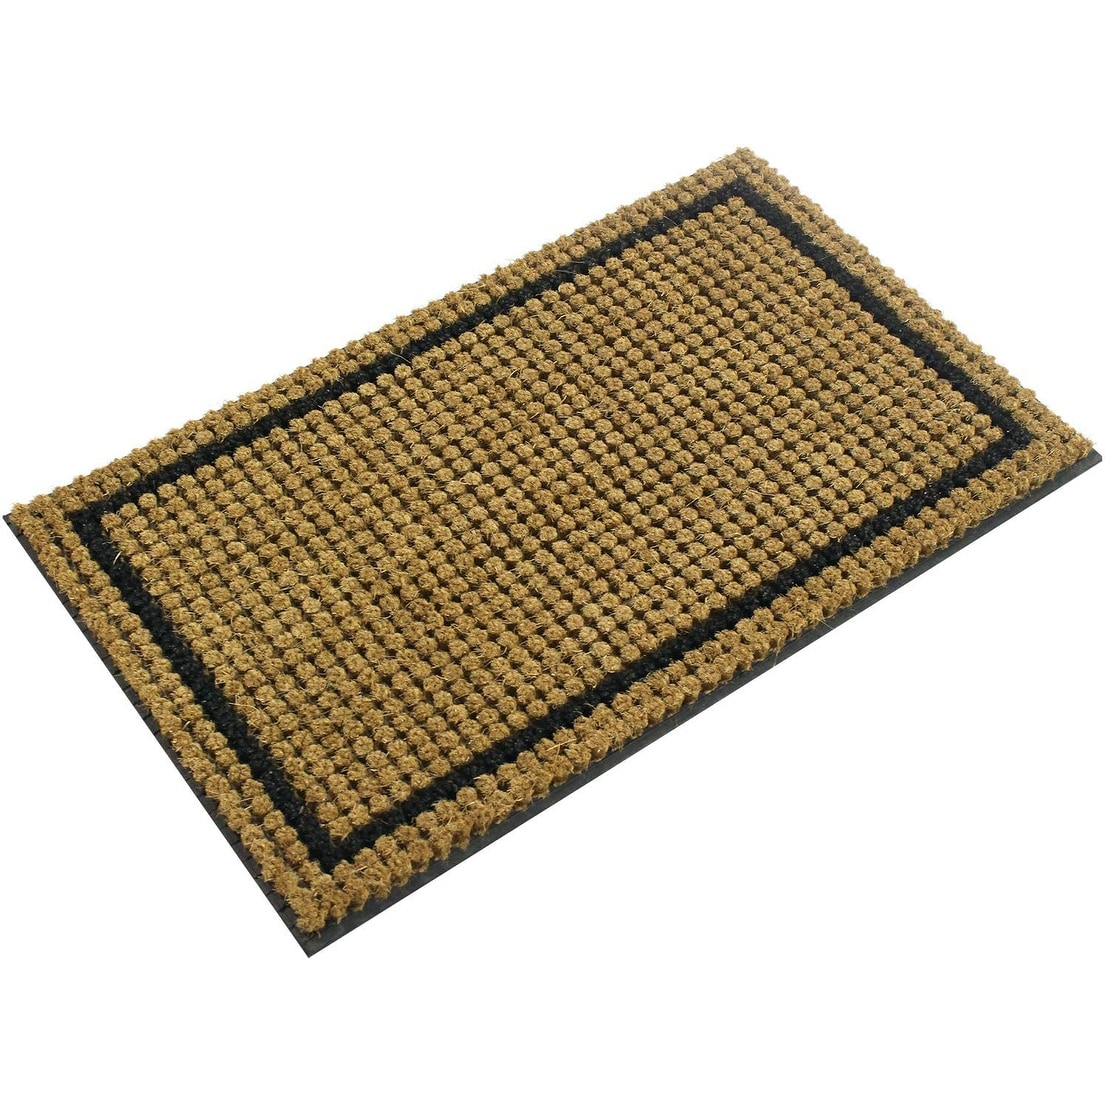 https://ak1.ostkcdn.com/images/products/is/images/direct/c95195bc3aa630f917daaeb7c251239465da48c3/Envelor-Coco-Welcome-Mat-Coir-Cluster-Outdoor-Doormat-Rubber-Backed-Entrance-Door-Mat-18-x-30-Inches.jpg